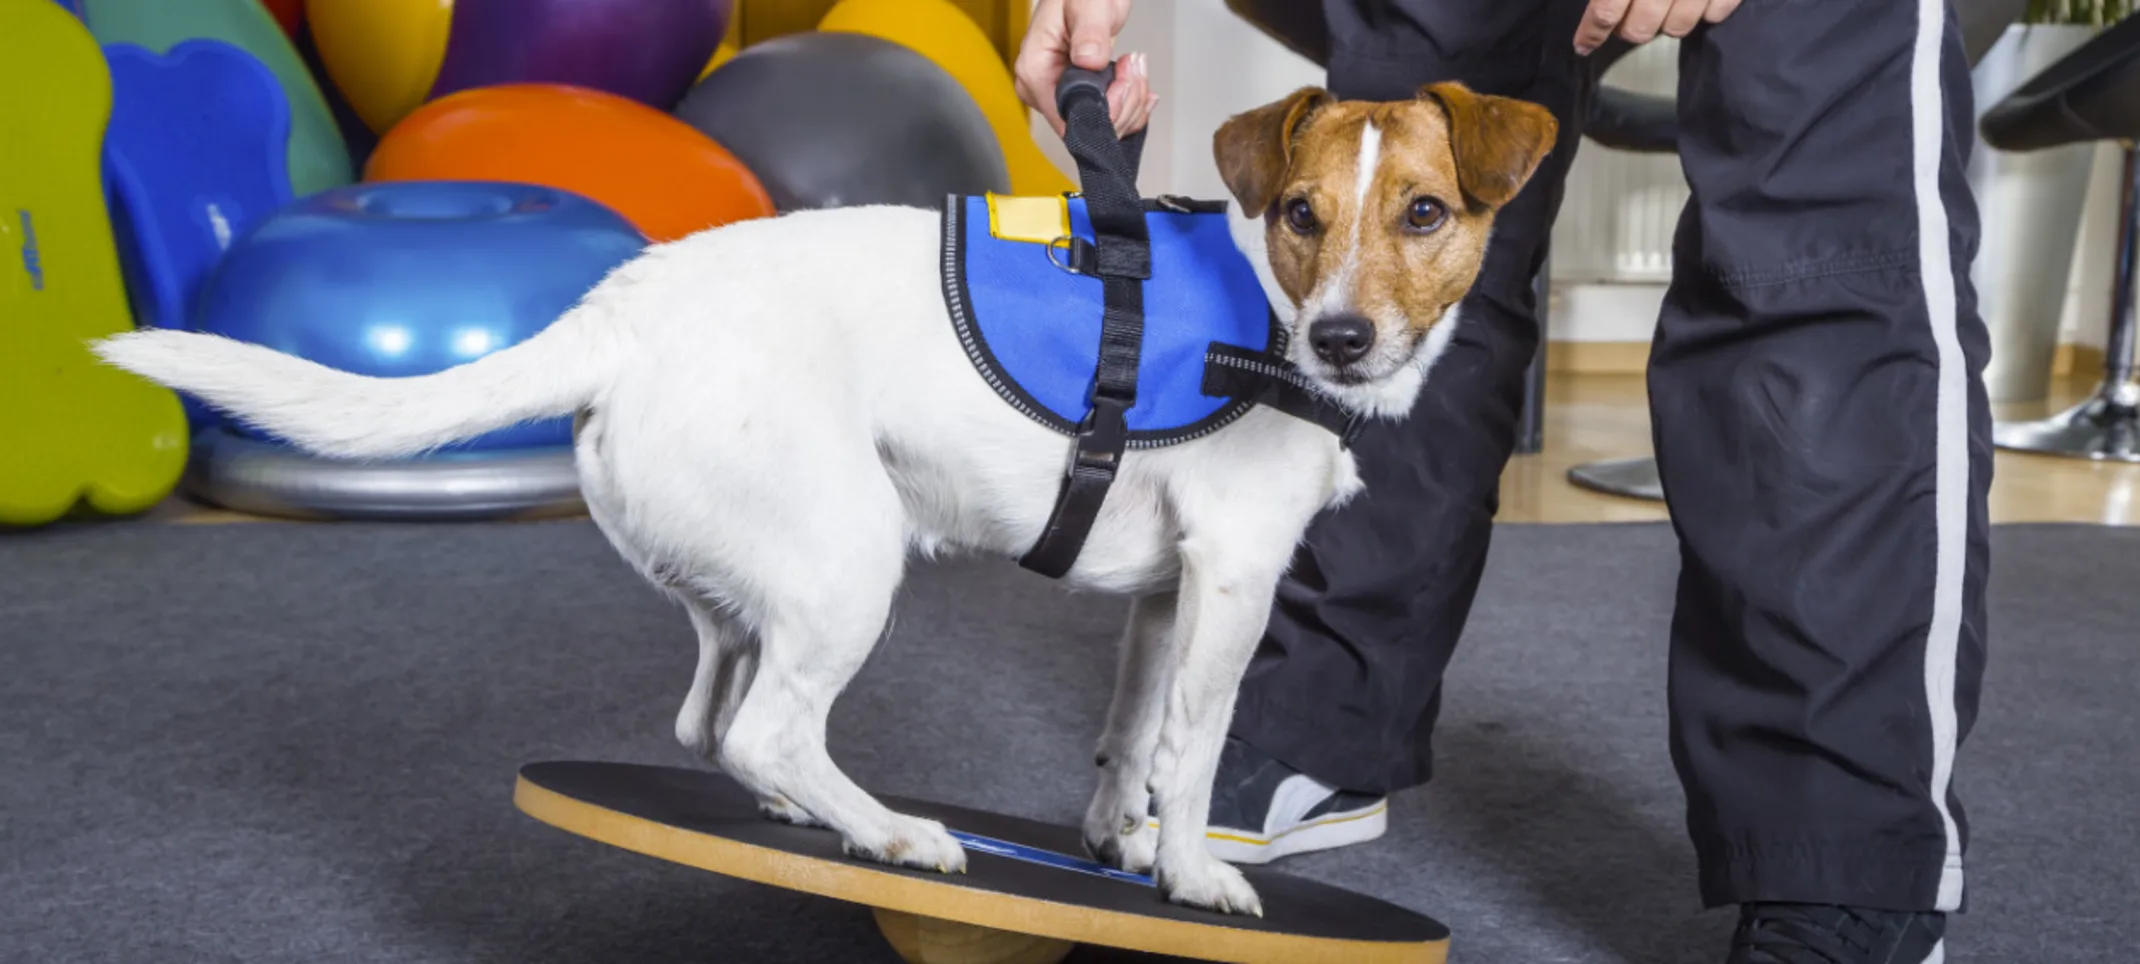 Dog on a Board with Trainer